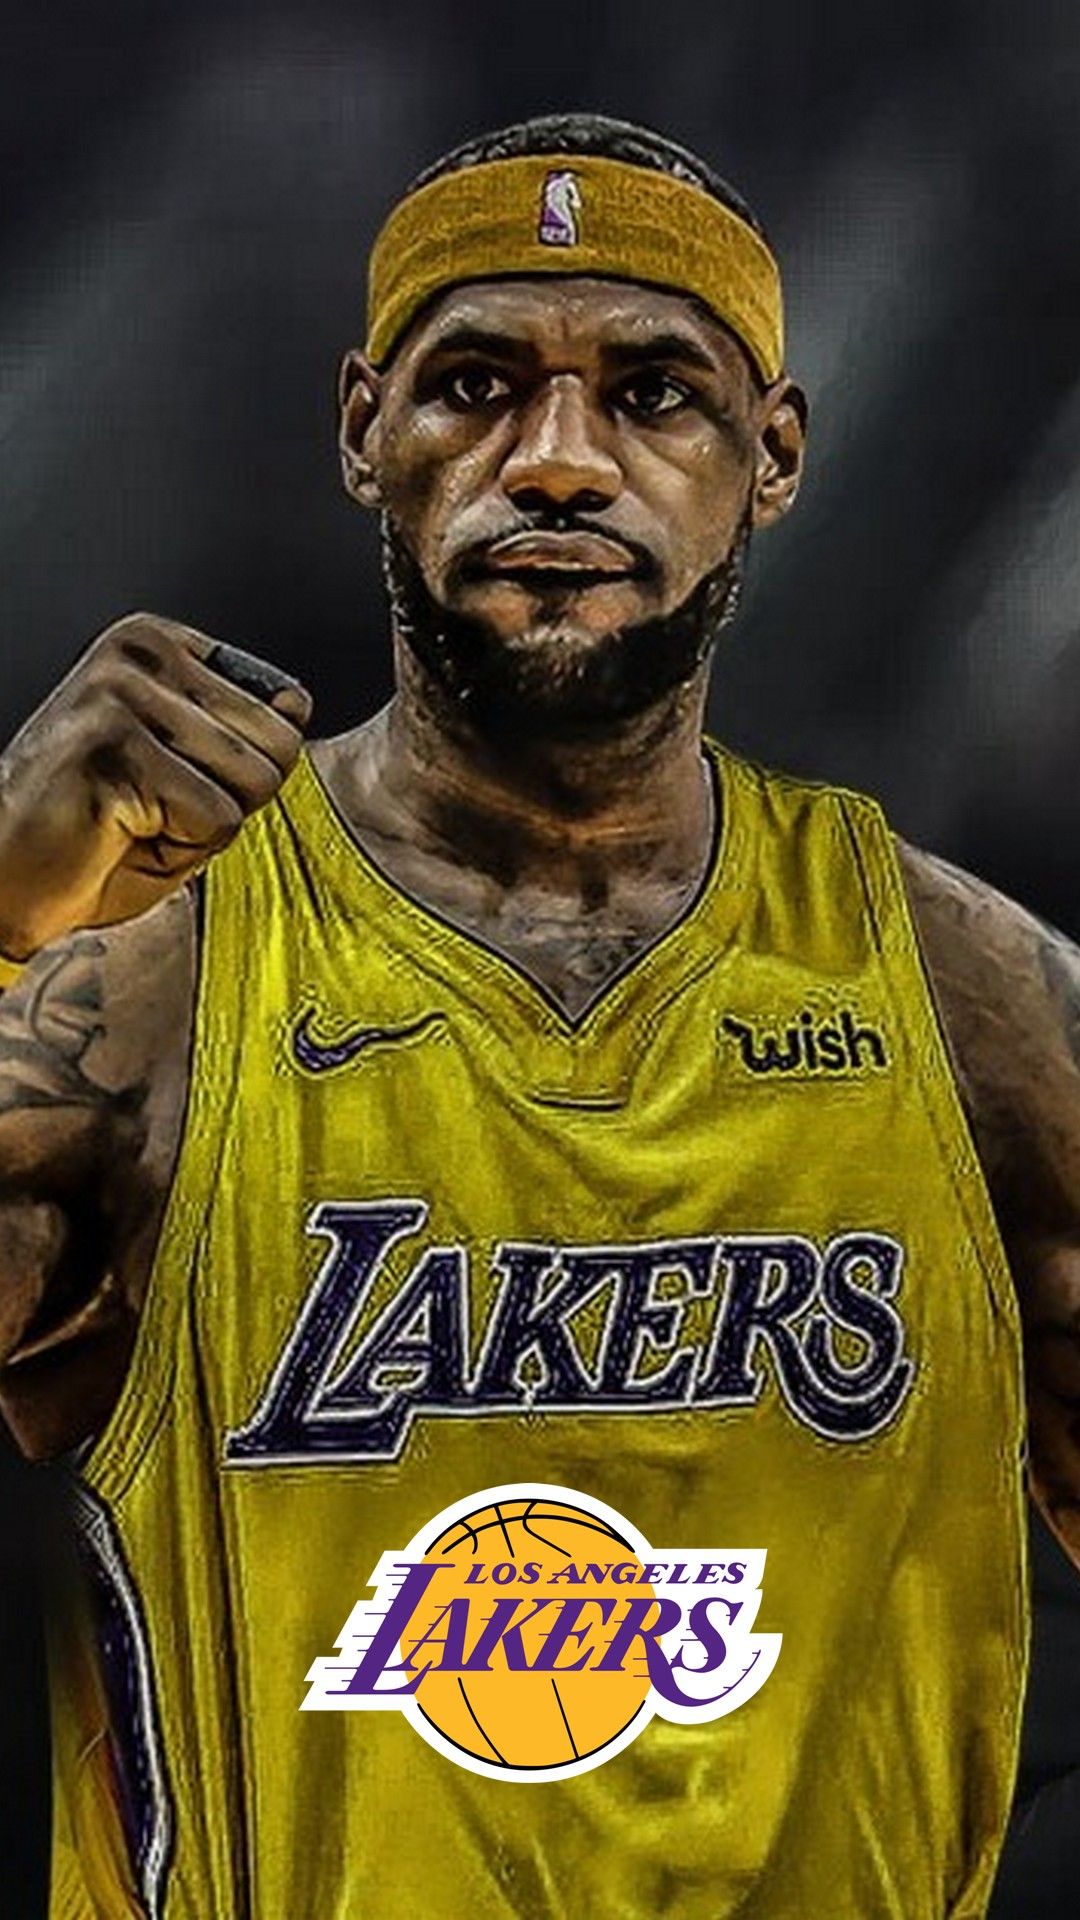 Lebron James Wallpaper Discover more Background, dunk, iPad, Iphone, Lakers  wallpapers.